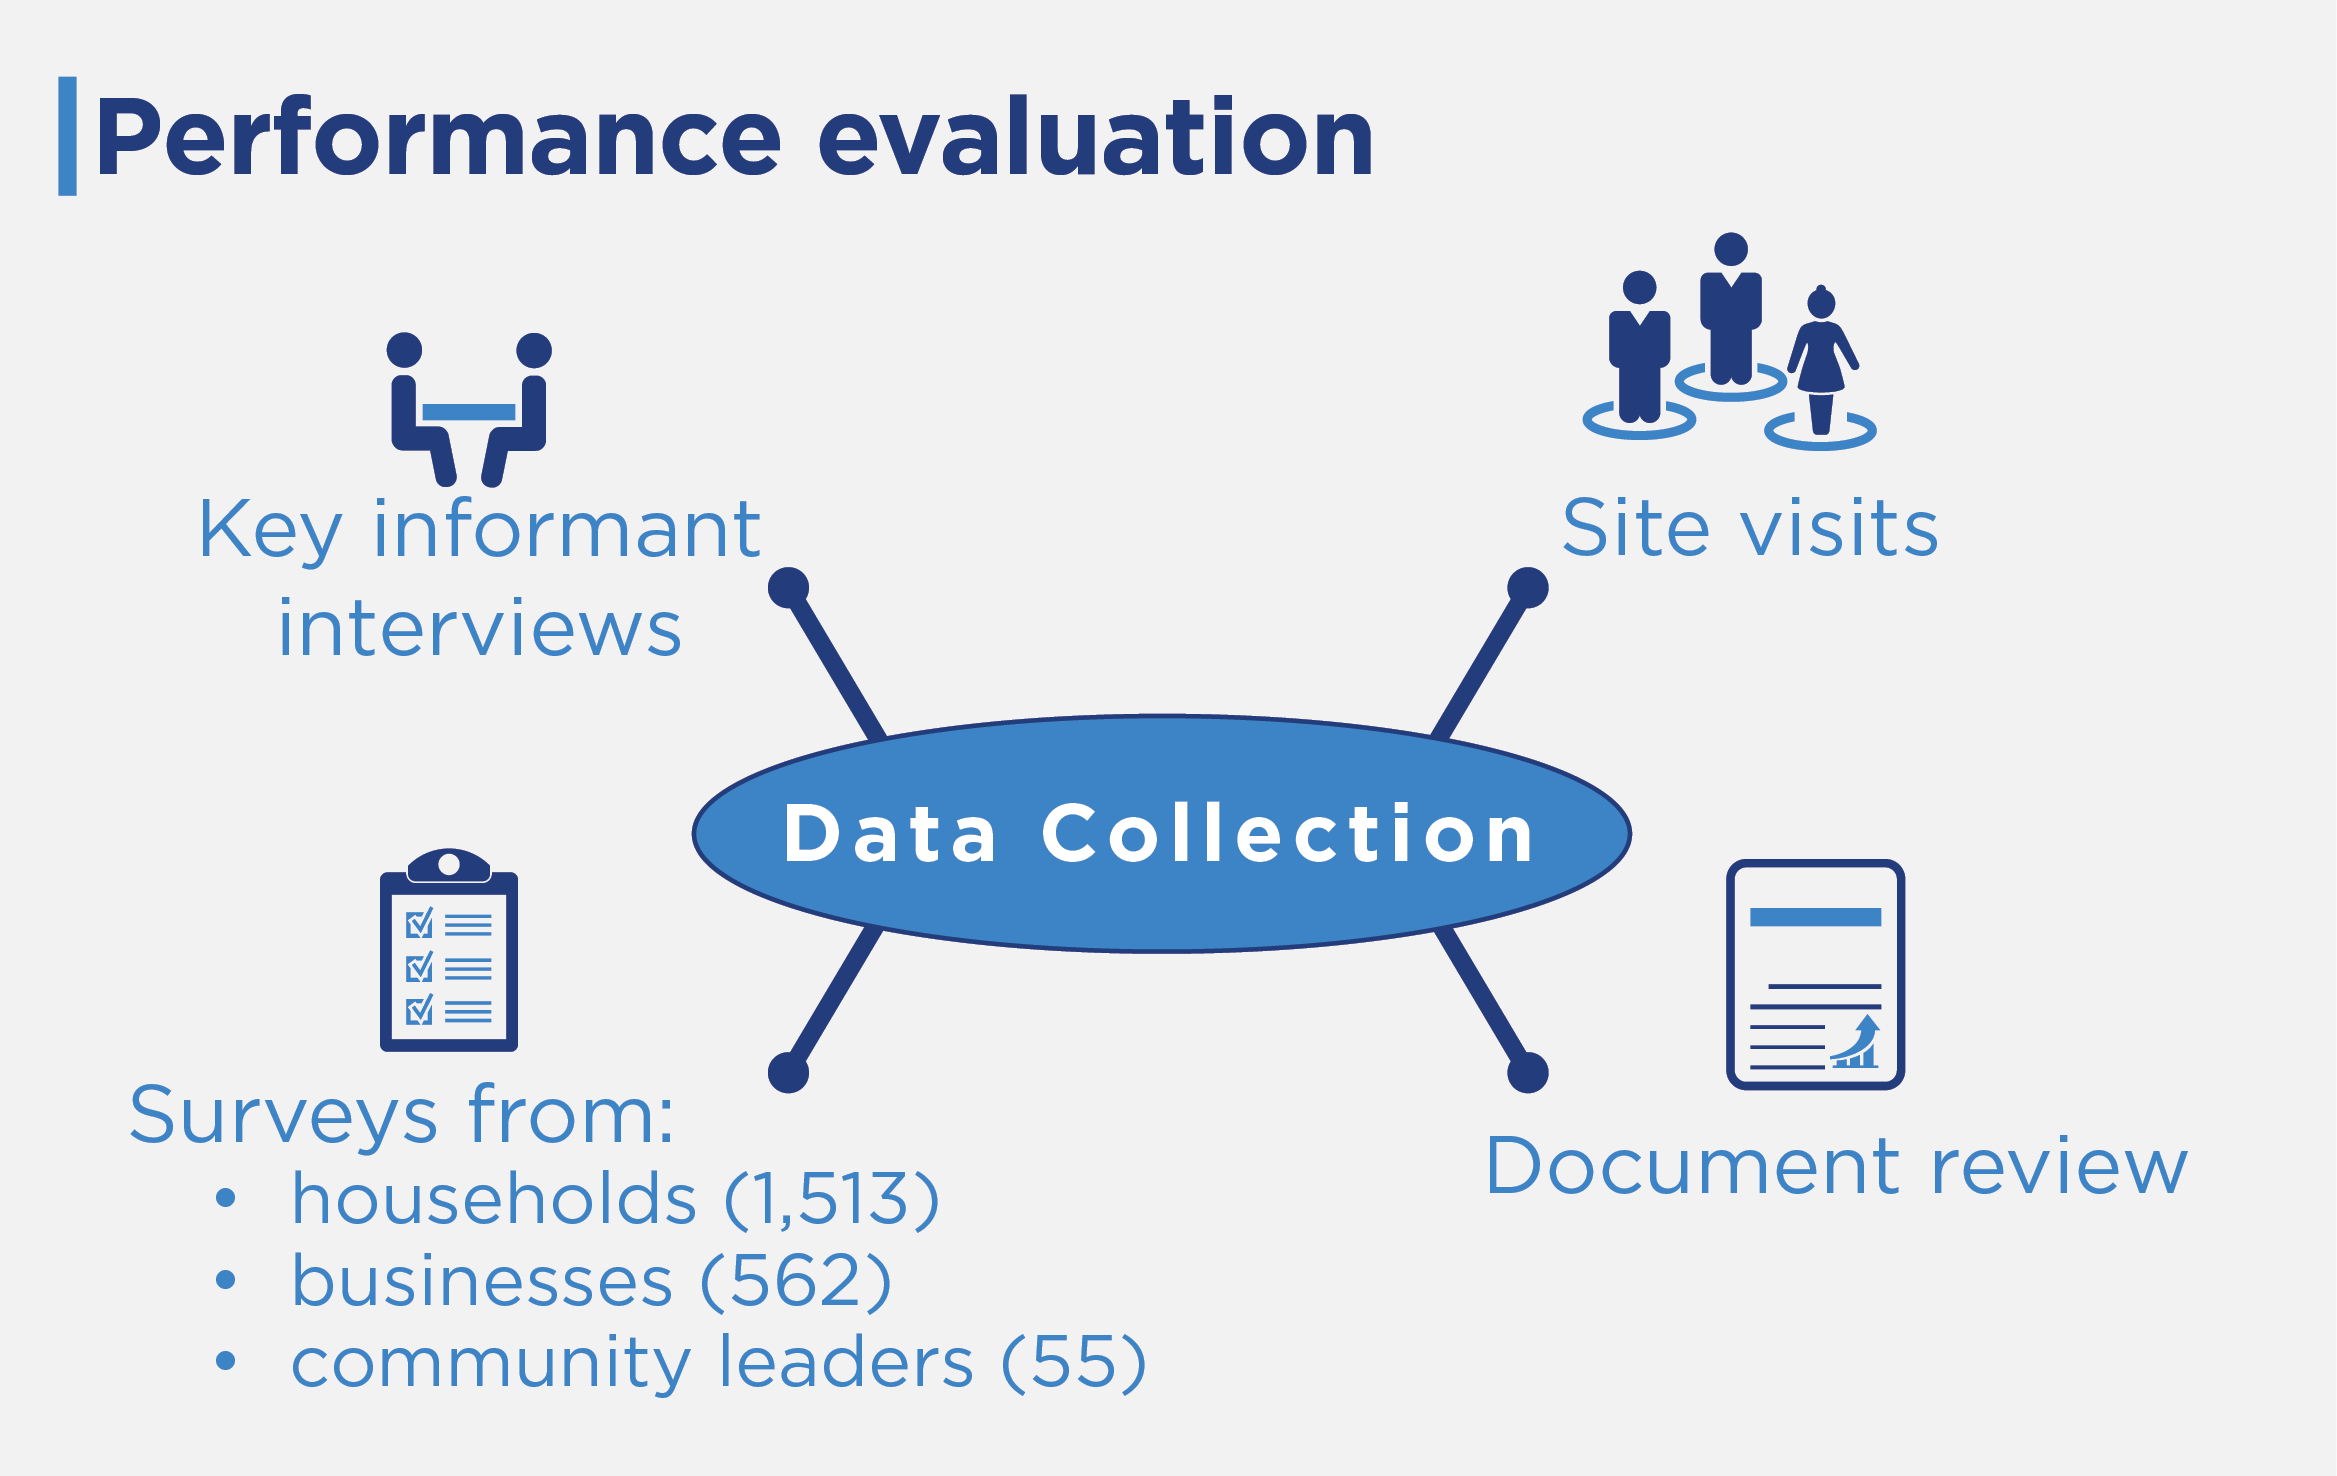 Data collection was from key informant interviews, site visits, document review and surveys from households (1,513), businesses (562) and community leaders (55).